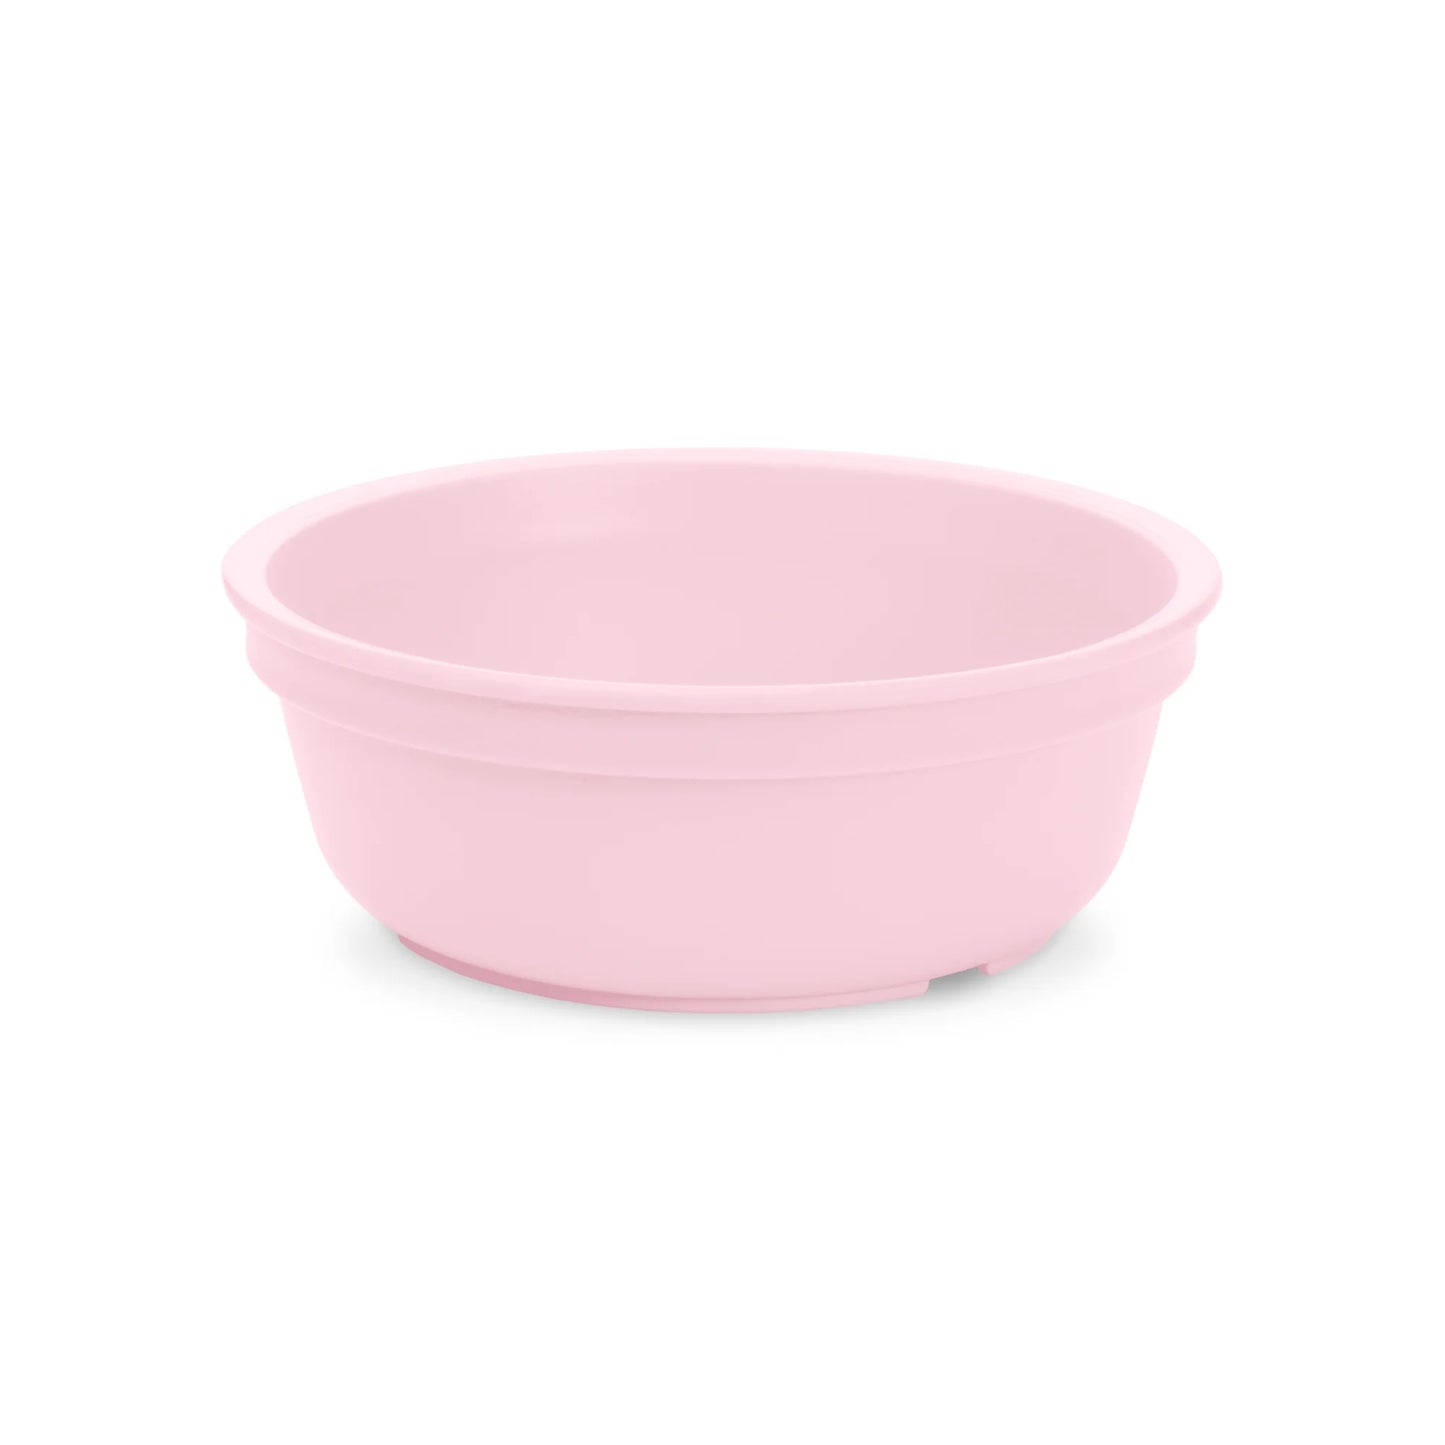 Re-Play Bowl - Ice Pink